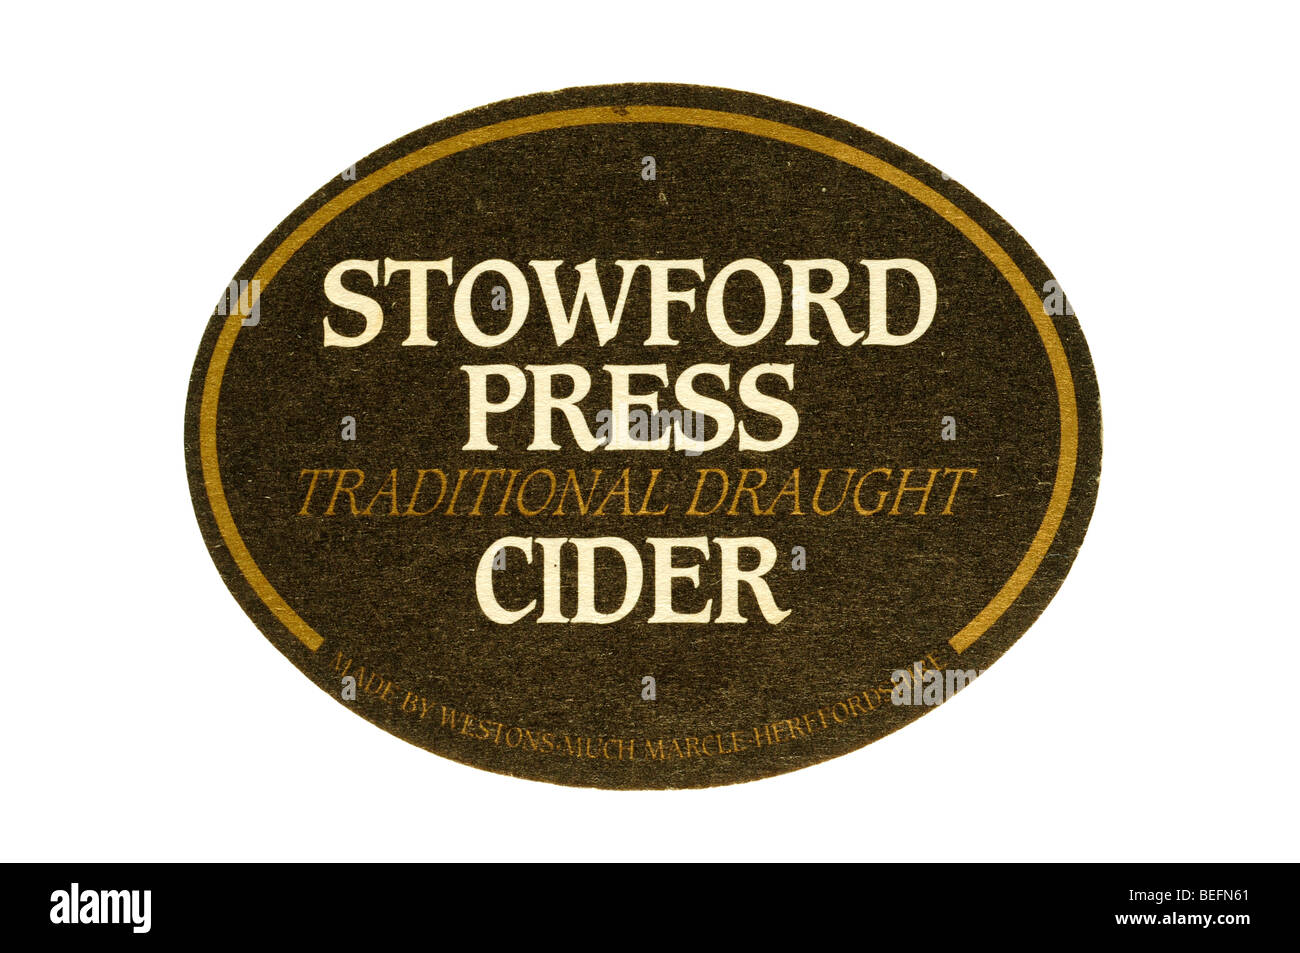 stowford press traditional draught cider beer mat Stock Photo